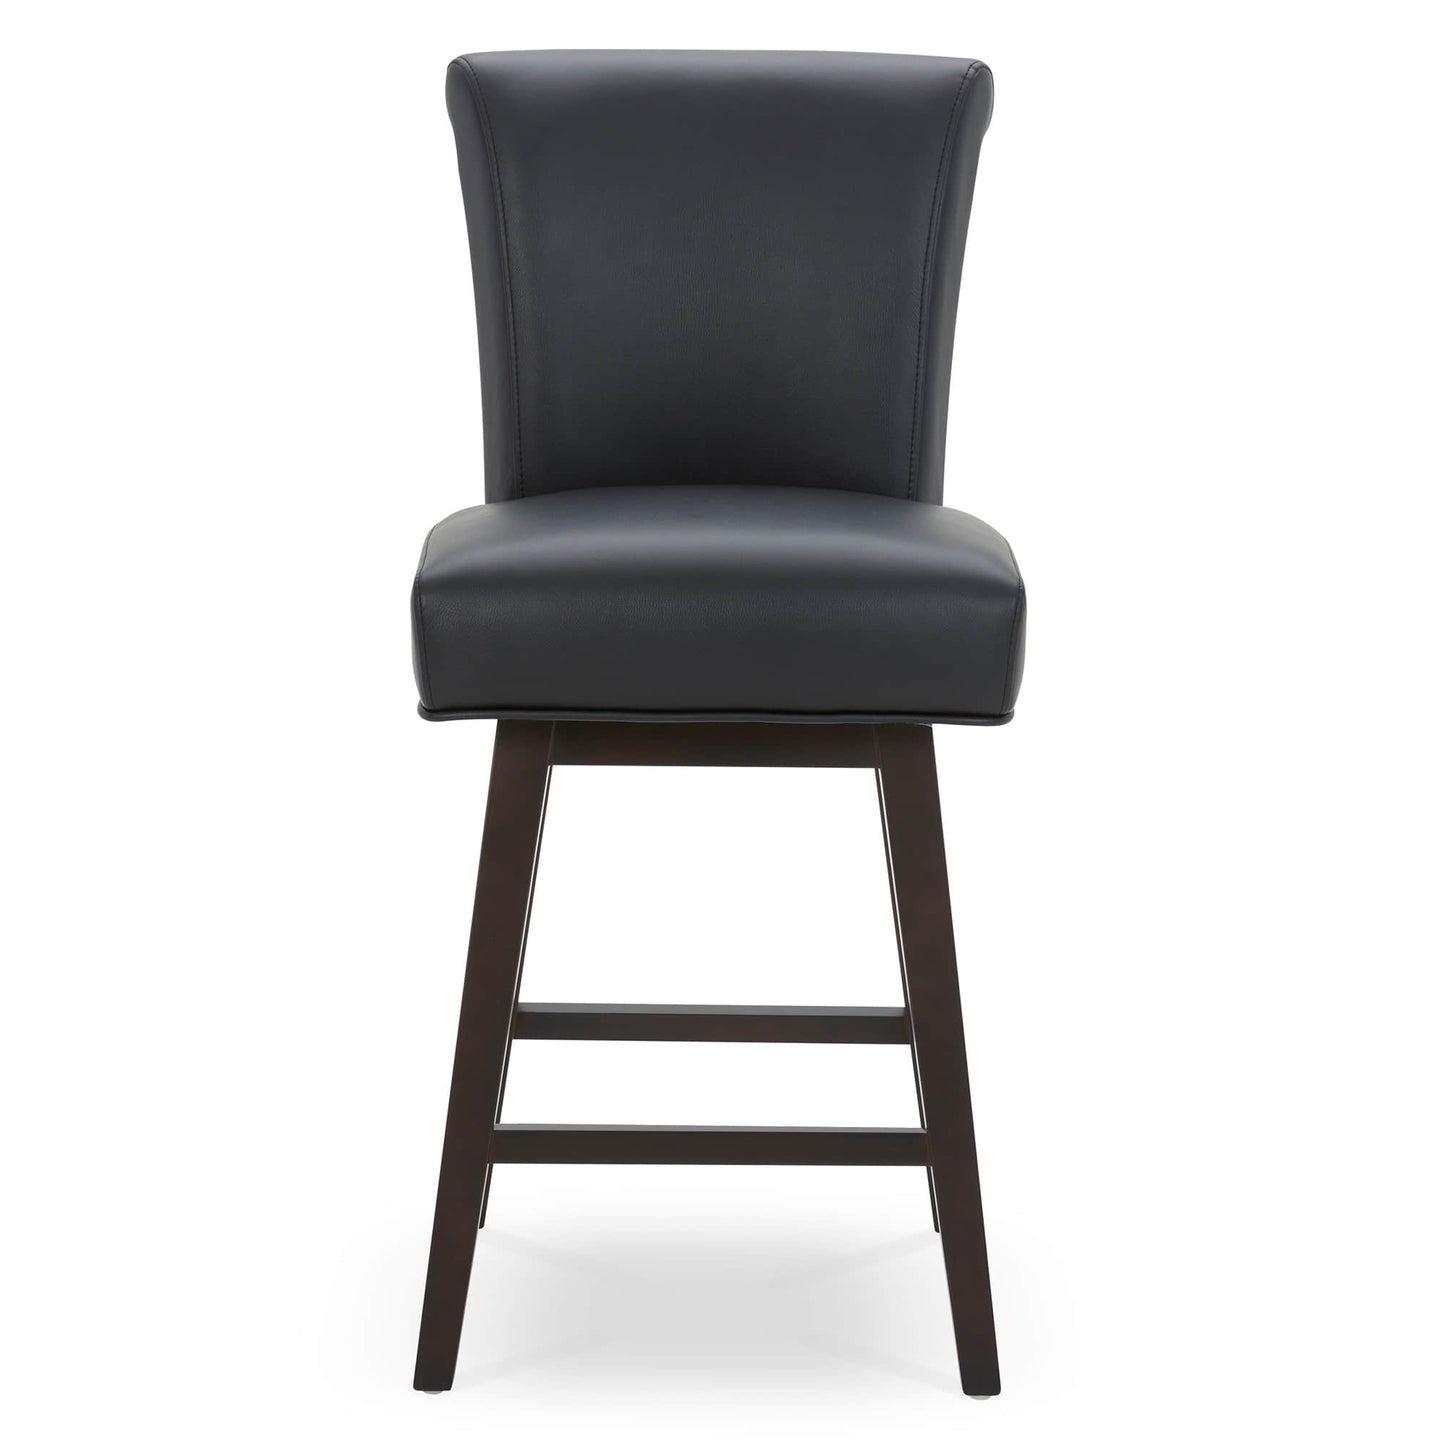 CHITA LIVING-Alina Modern Swivel Counter Stool-Counter Stools-Faux Leather-Black-1-Pack